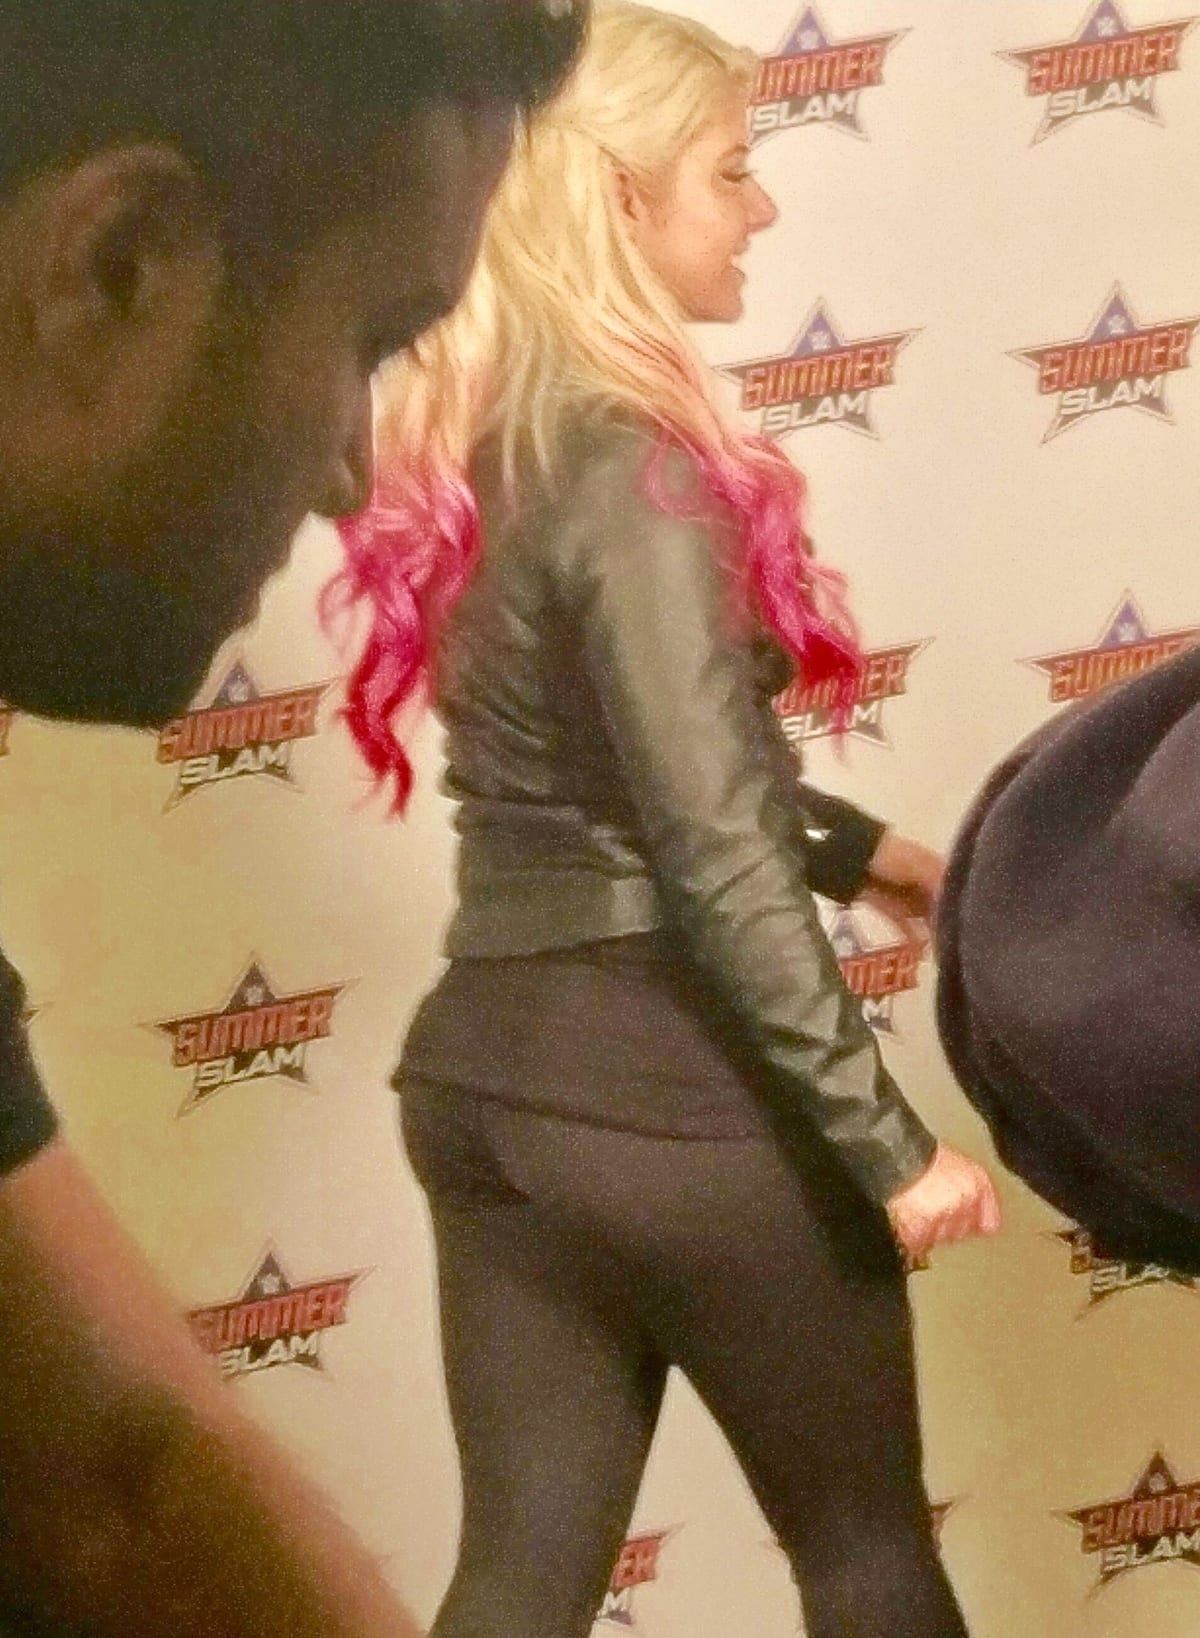 Check Out 11 Photos of Alexa Bliss' Biscuit Butt.